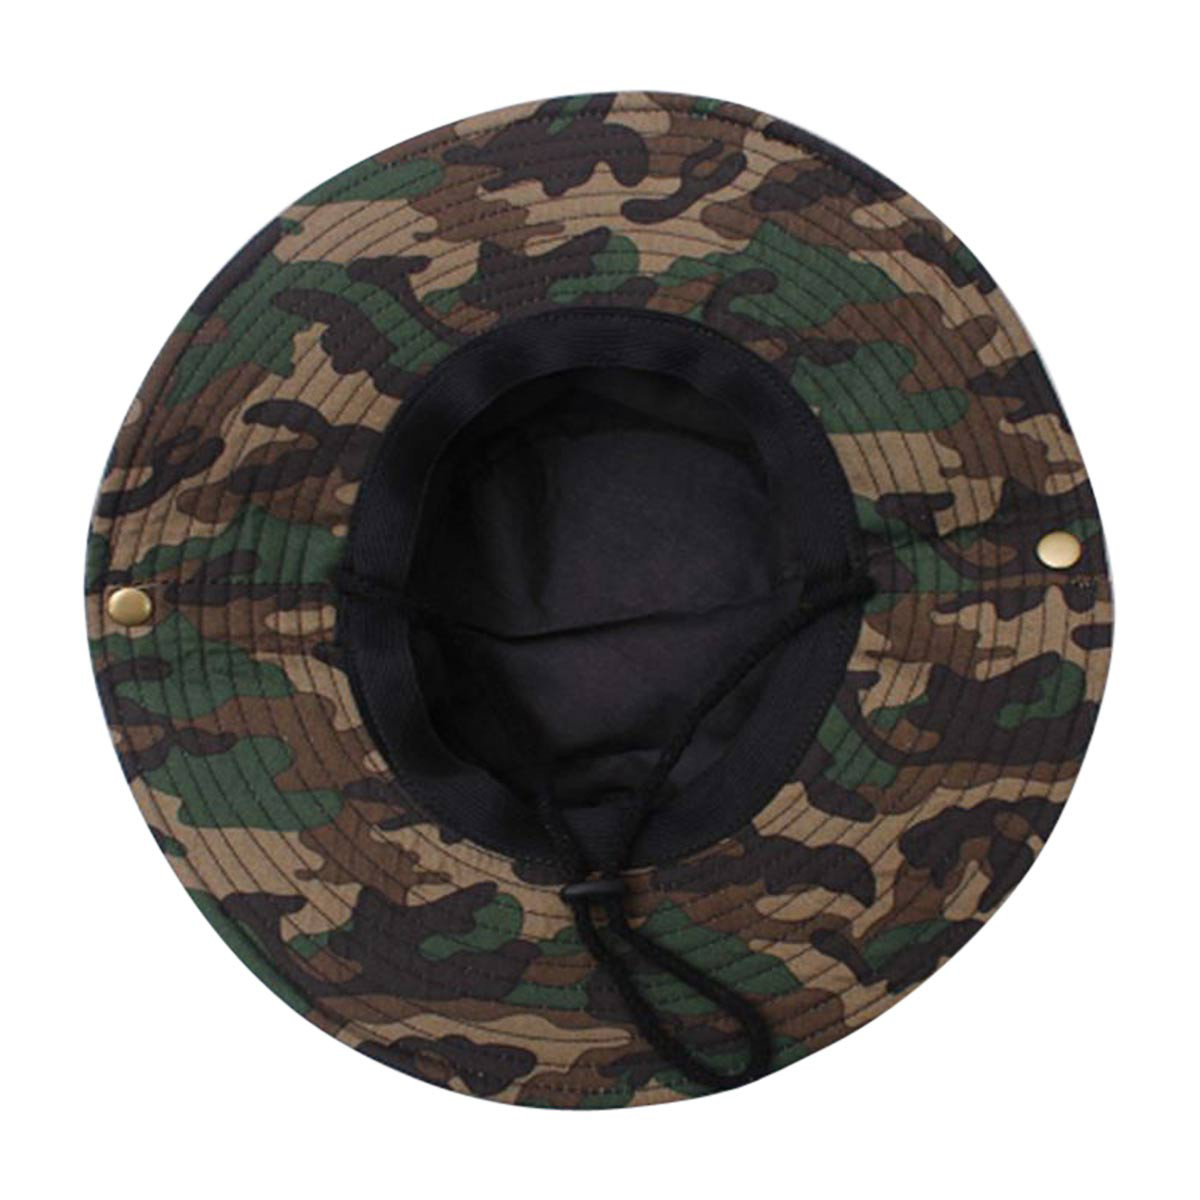 Mission Ridge Men's Boonie Hat With Camouflage Print